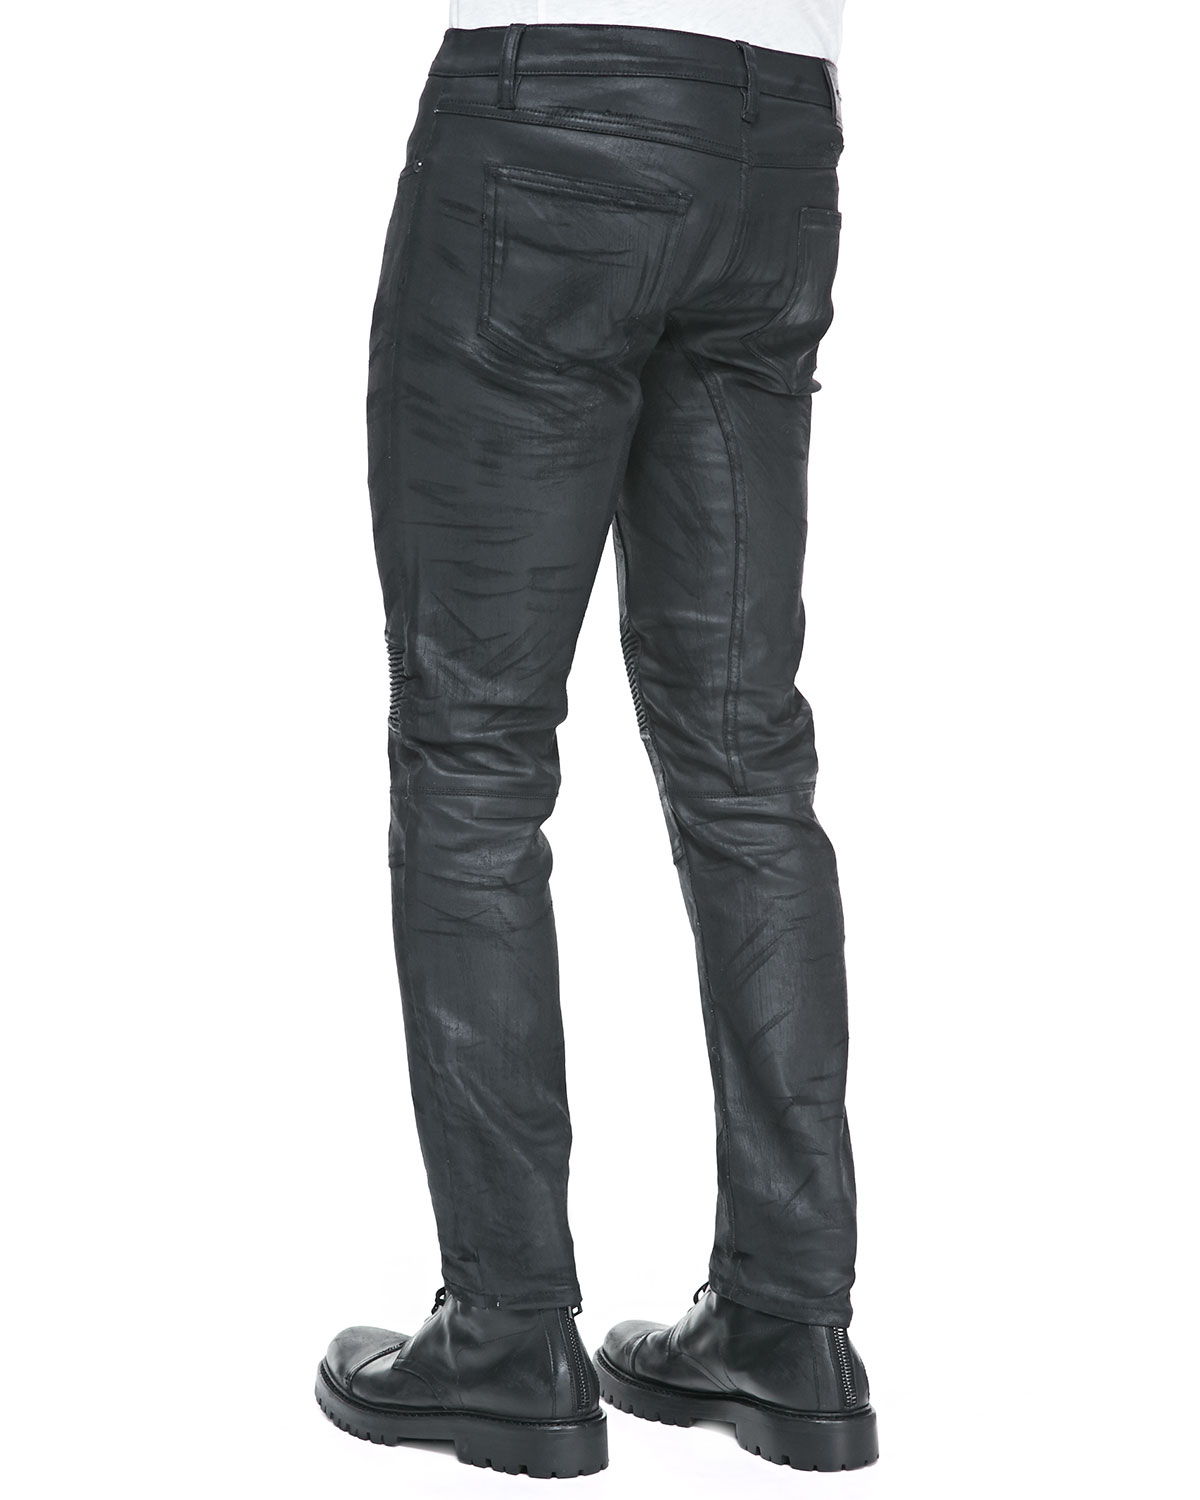 resin coated jeans